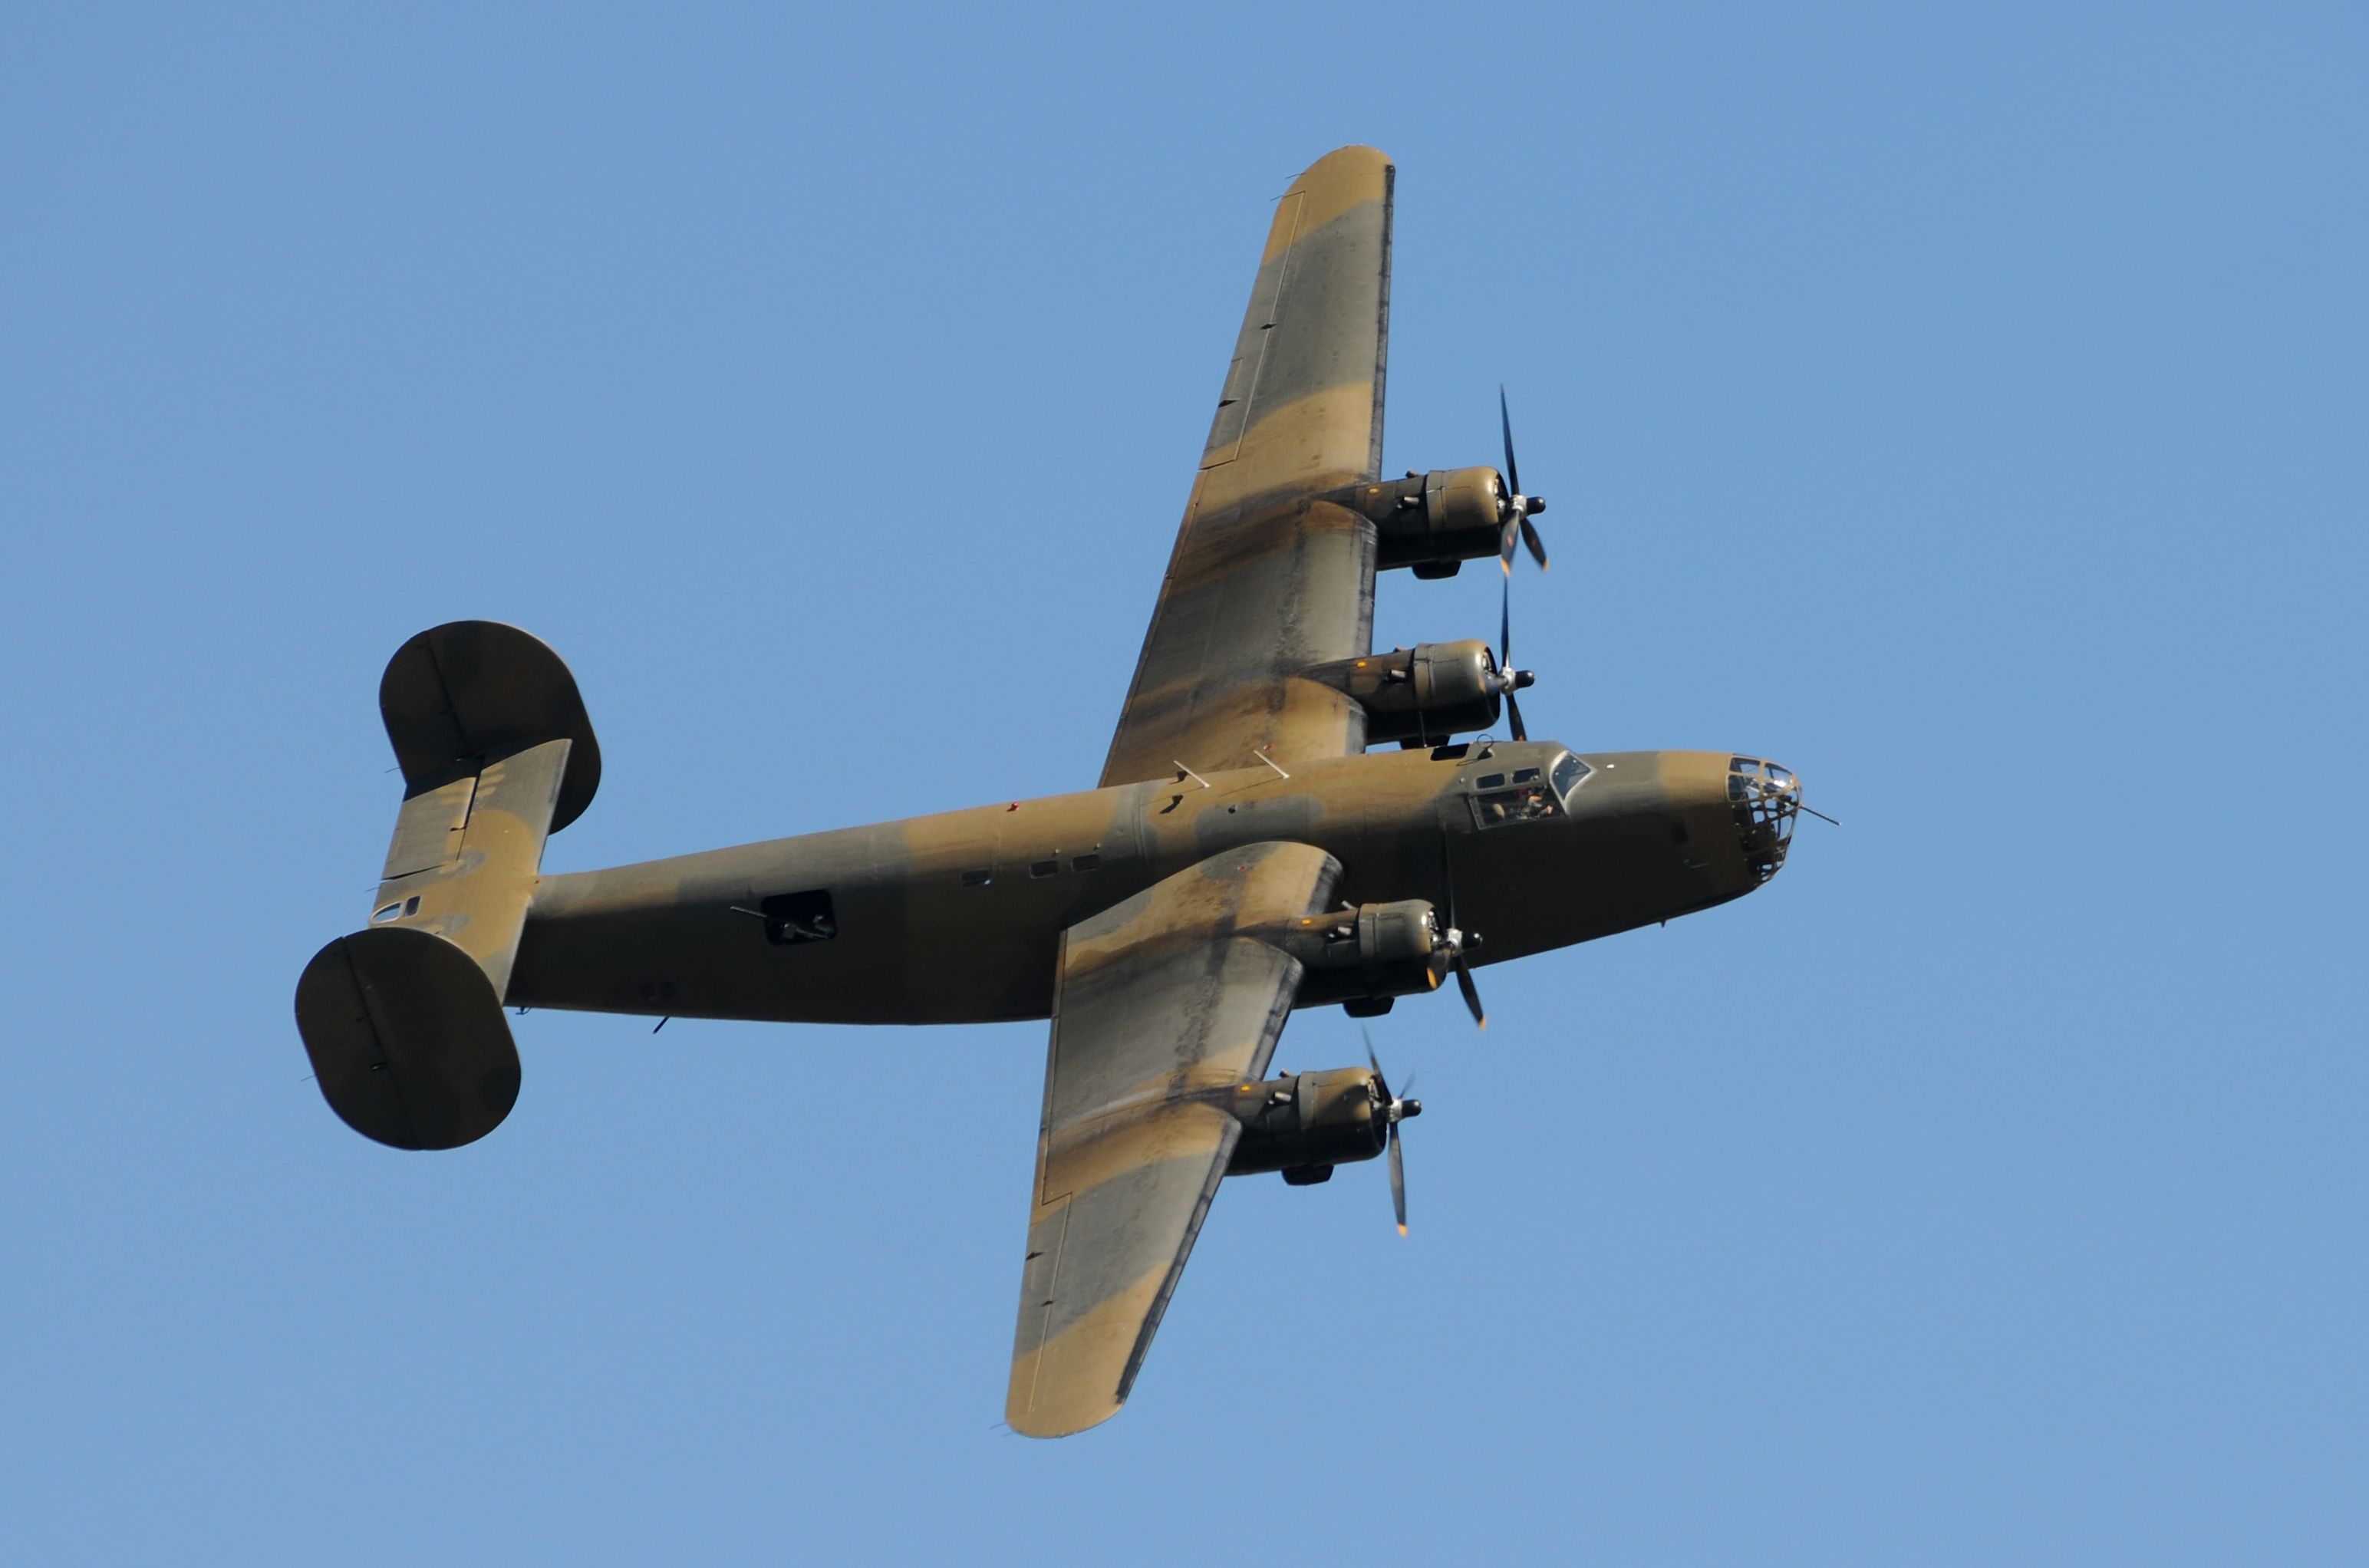 A B-24 Liberator flying in the sky.